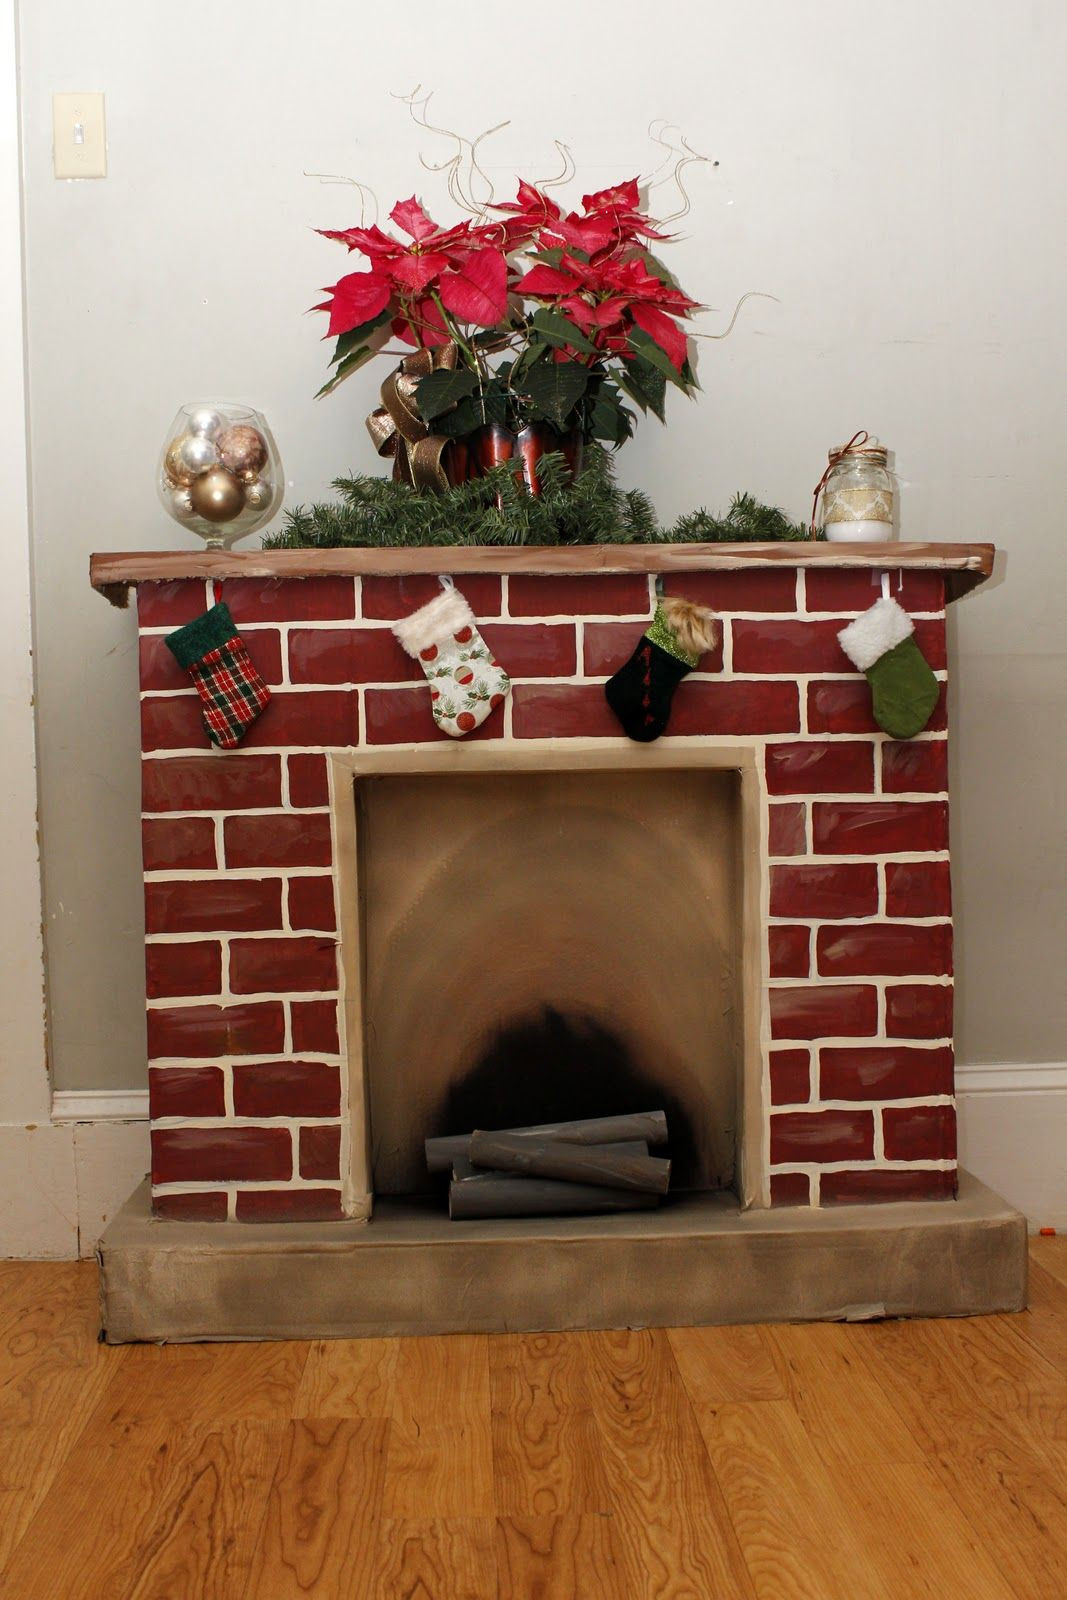 Christmas Corrugated Fireplace Brick Paper
 365 Days to Simplicity Chestnuts roasting on an cardboard